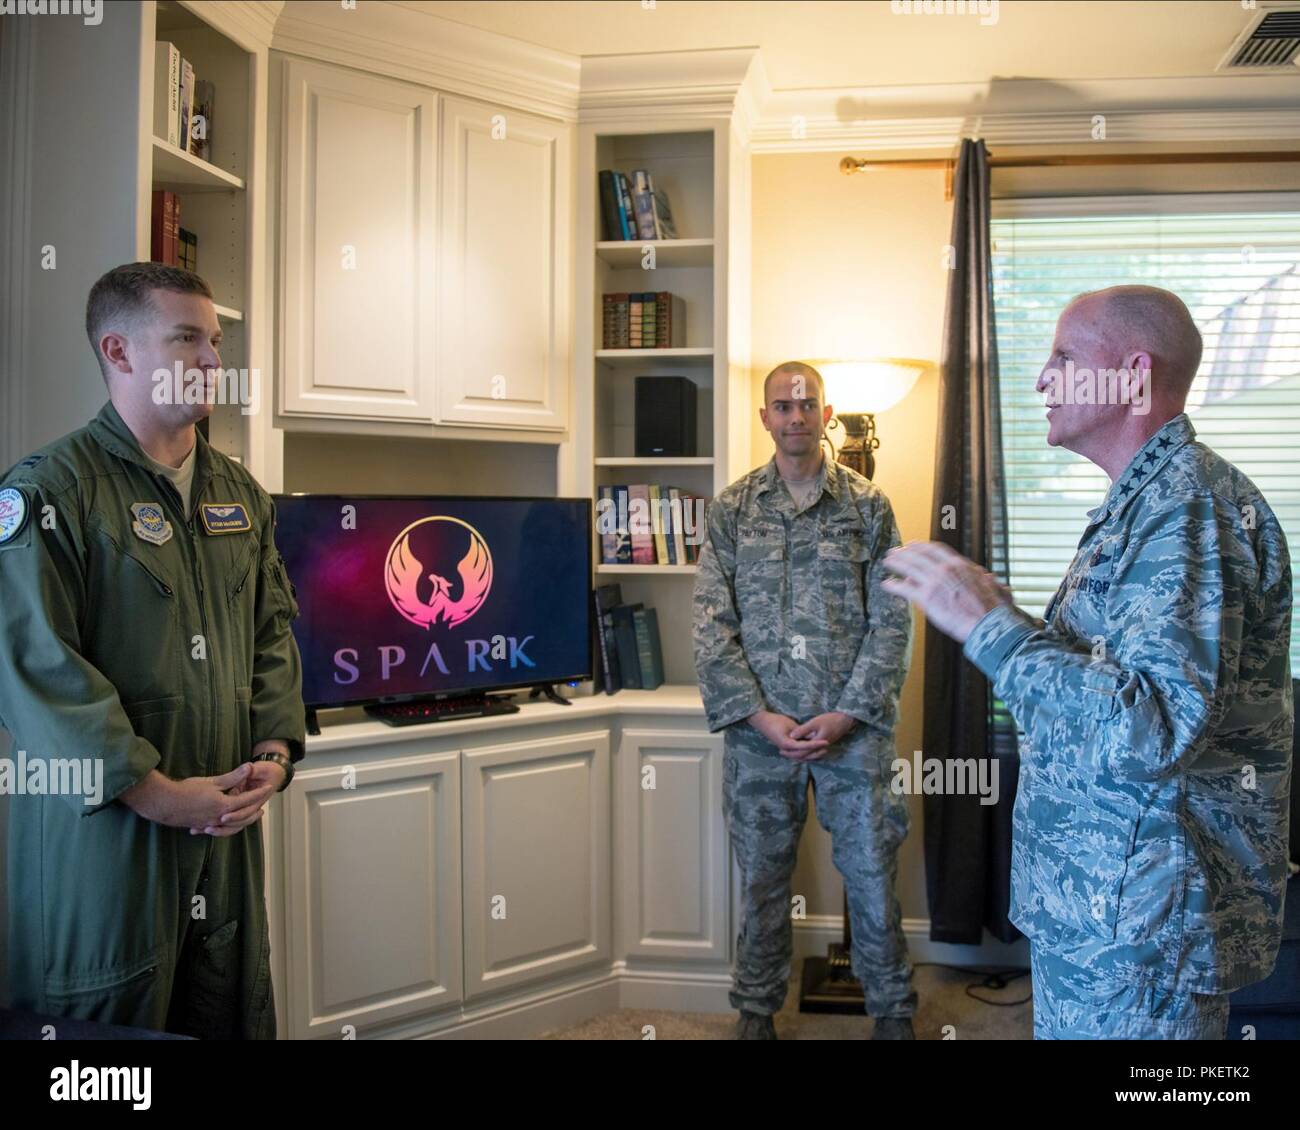 U.S. Air Force Vice Chief of Staff Gen. Stephen Wilson, right, speaks with Capt. Ryan McGuire and Capt. Jacob Payton, both with the 60th Air Mobility Wing Phoenix Spark program, about the base's innovation initiatives during a visit at Travis Air Force Base, Calif., July 25, 2018. Wilson stopped at Travis for a gas-and-go before flying to Joint Base Pearl Harbor-Hickam, Hi., to attend the Commander of Pacific Air Forces assumption of command ceremony. Stock Photo